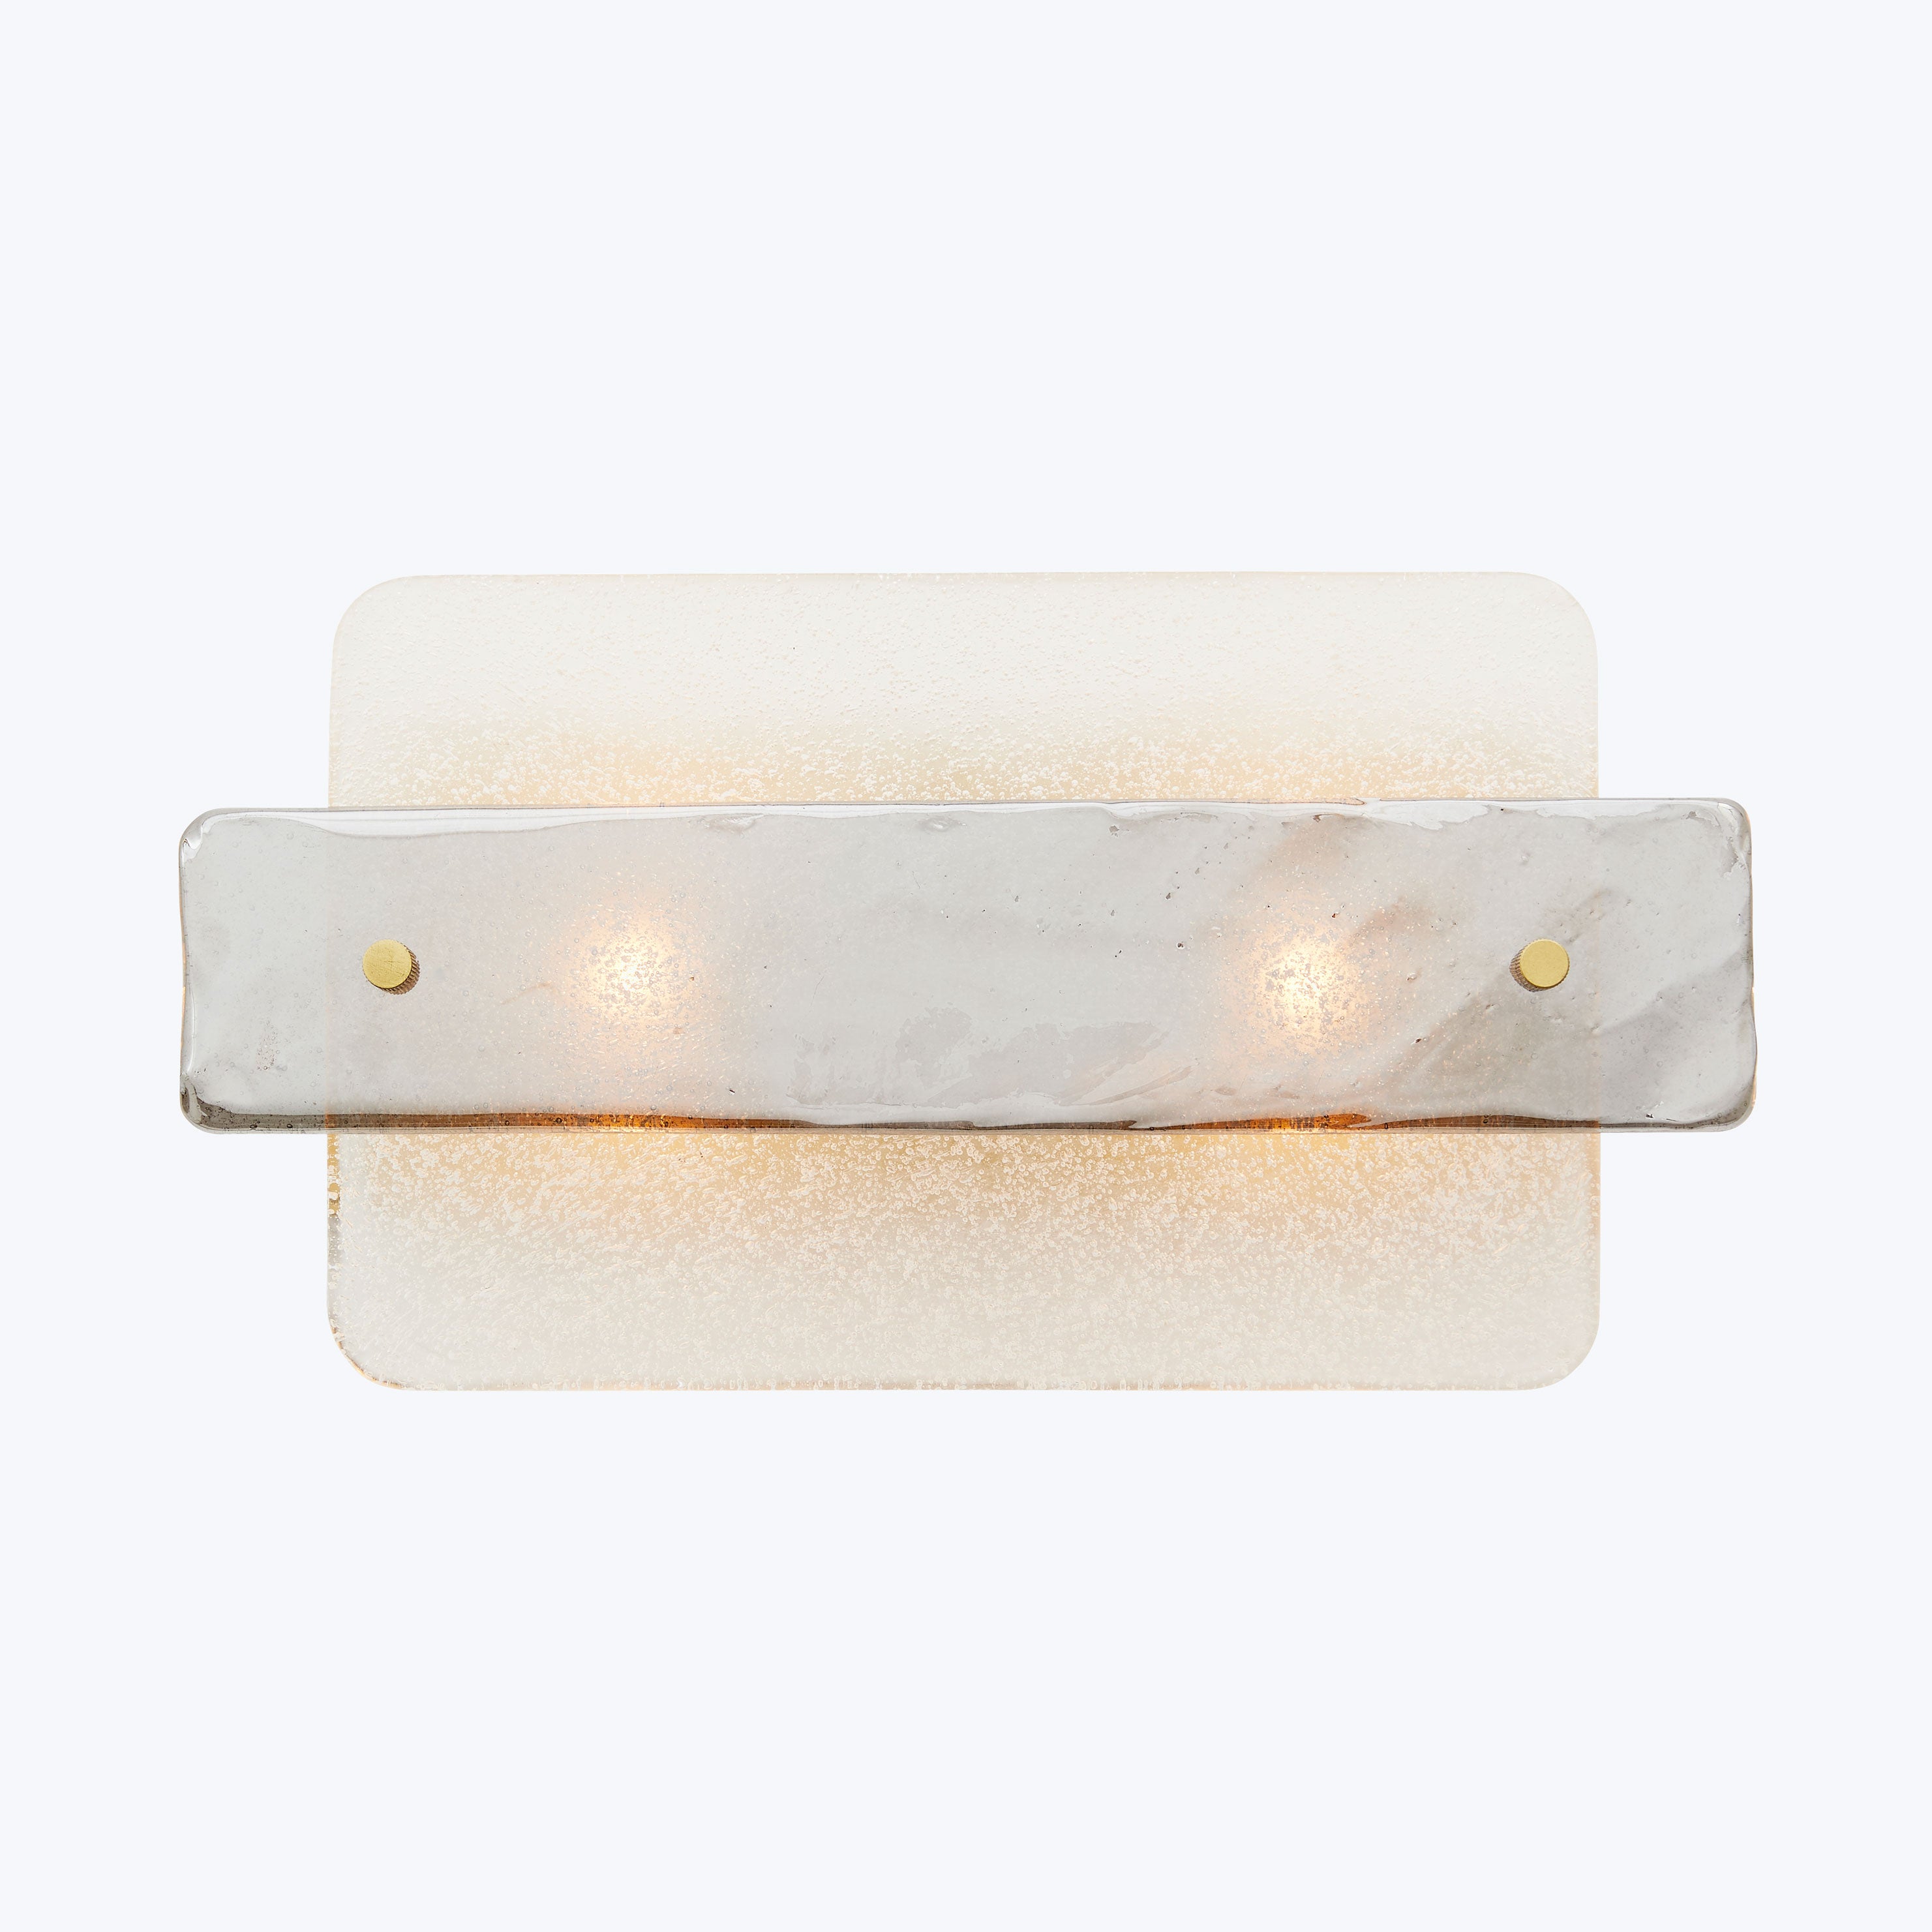 Minimalist rectangular frosted glass wall lamp emitting warm ambient glow.